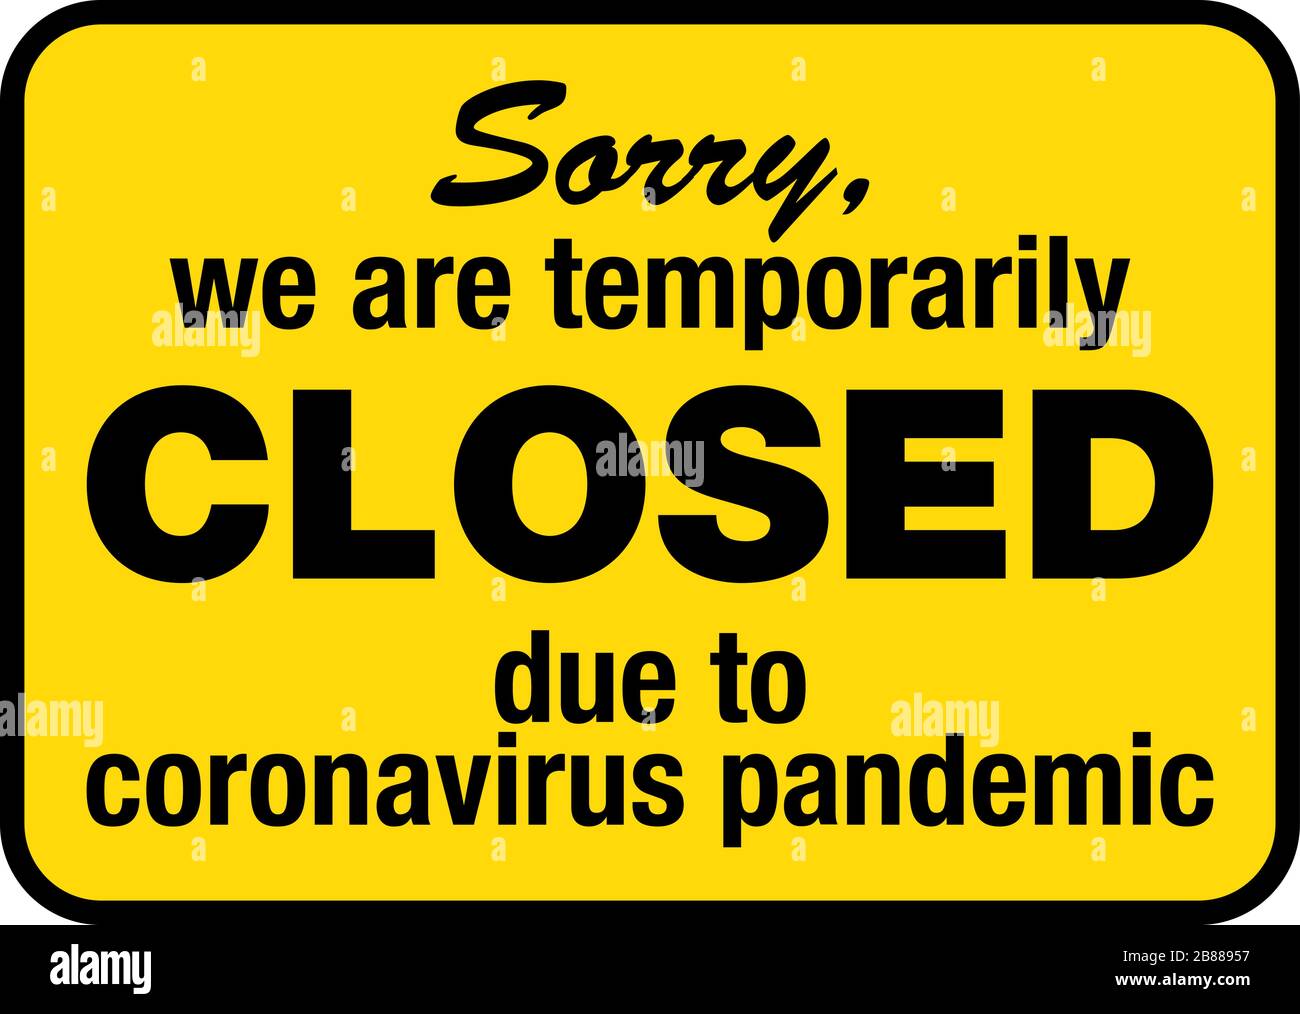 yellow sign with text TEMPORARILY CLOSED DUE TO CORONAVIRUS PANDEMIC vector illustration Stock Vector